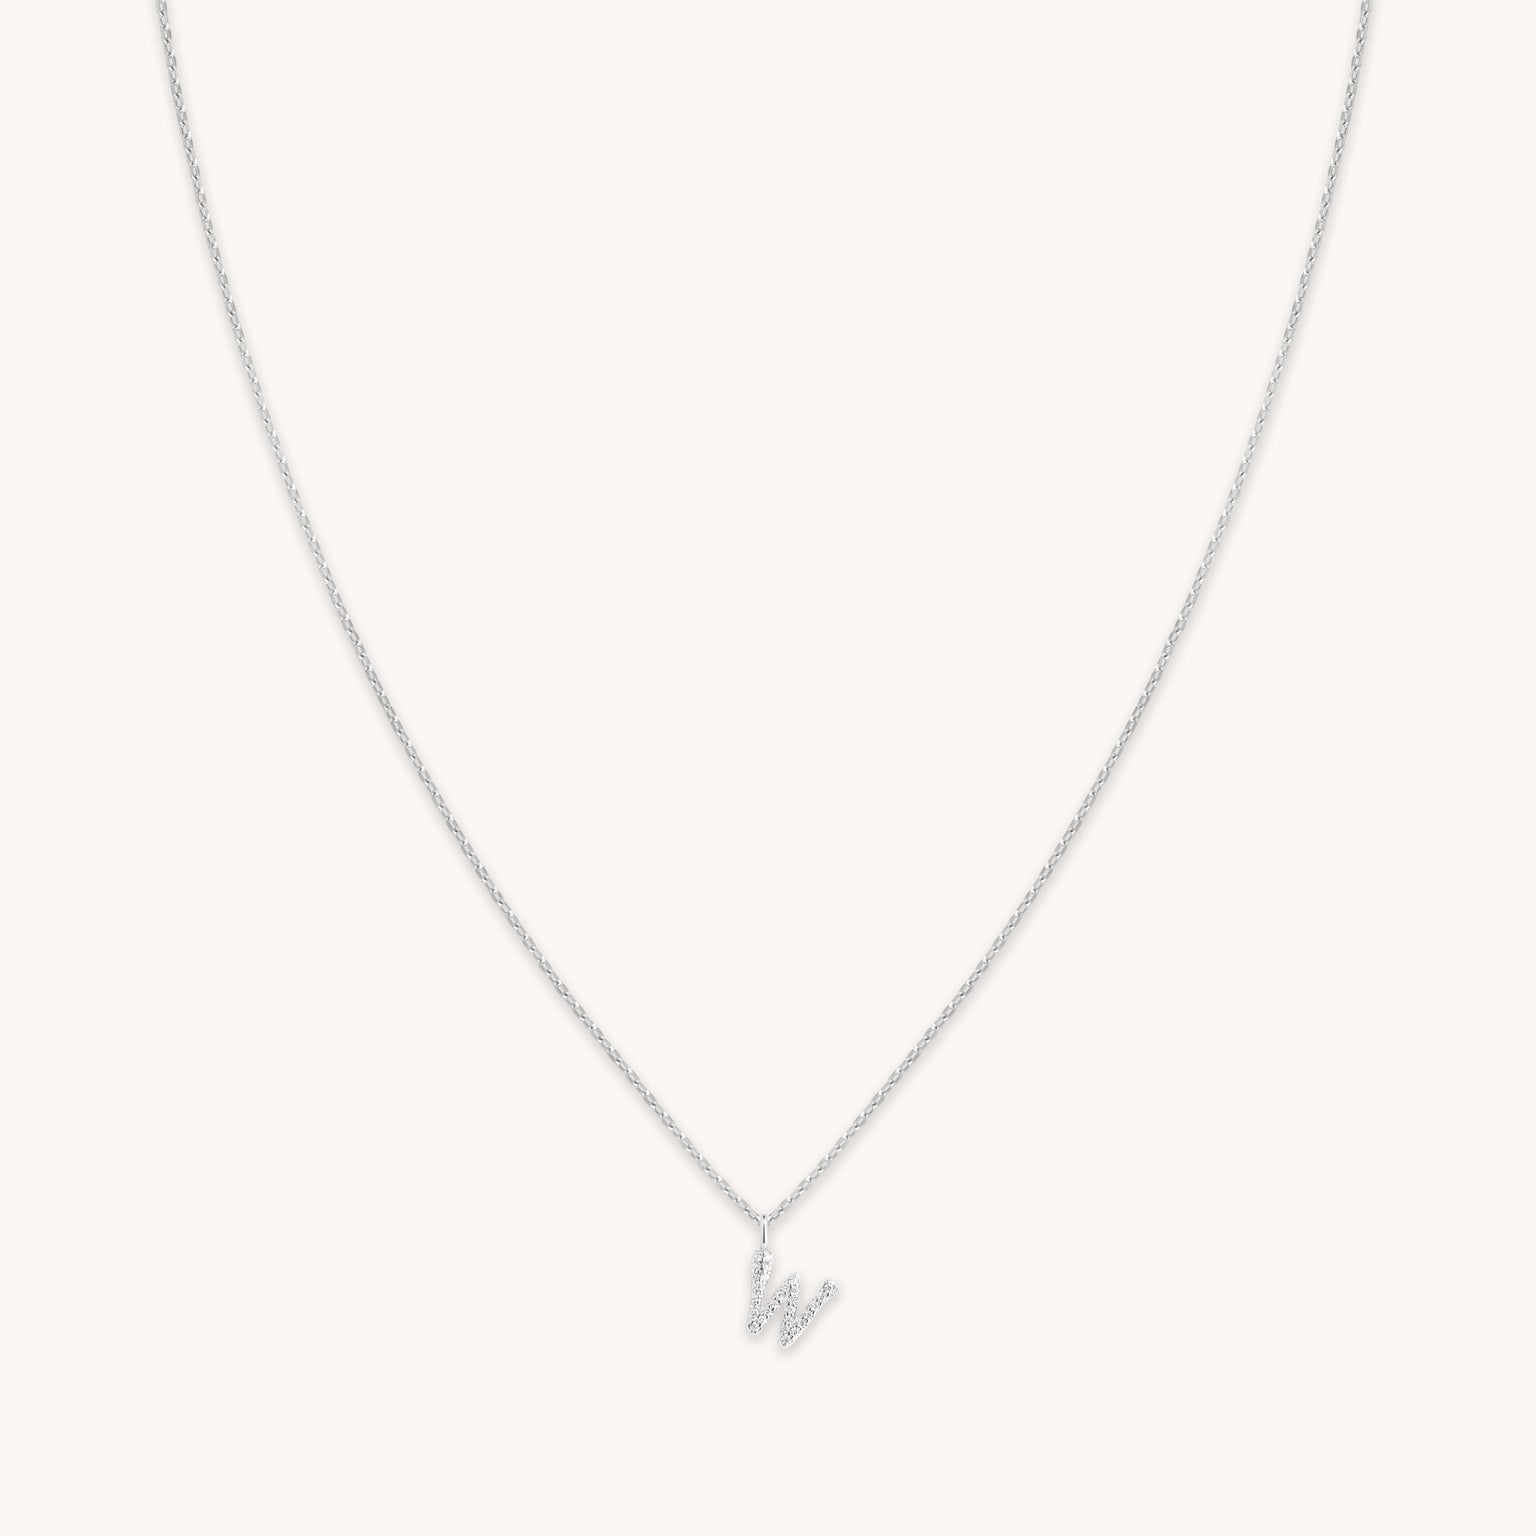 W Initial Pavé Pendant Necklace in Silver